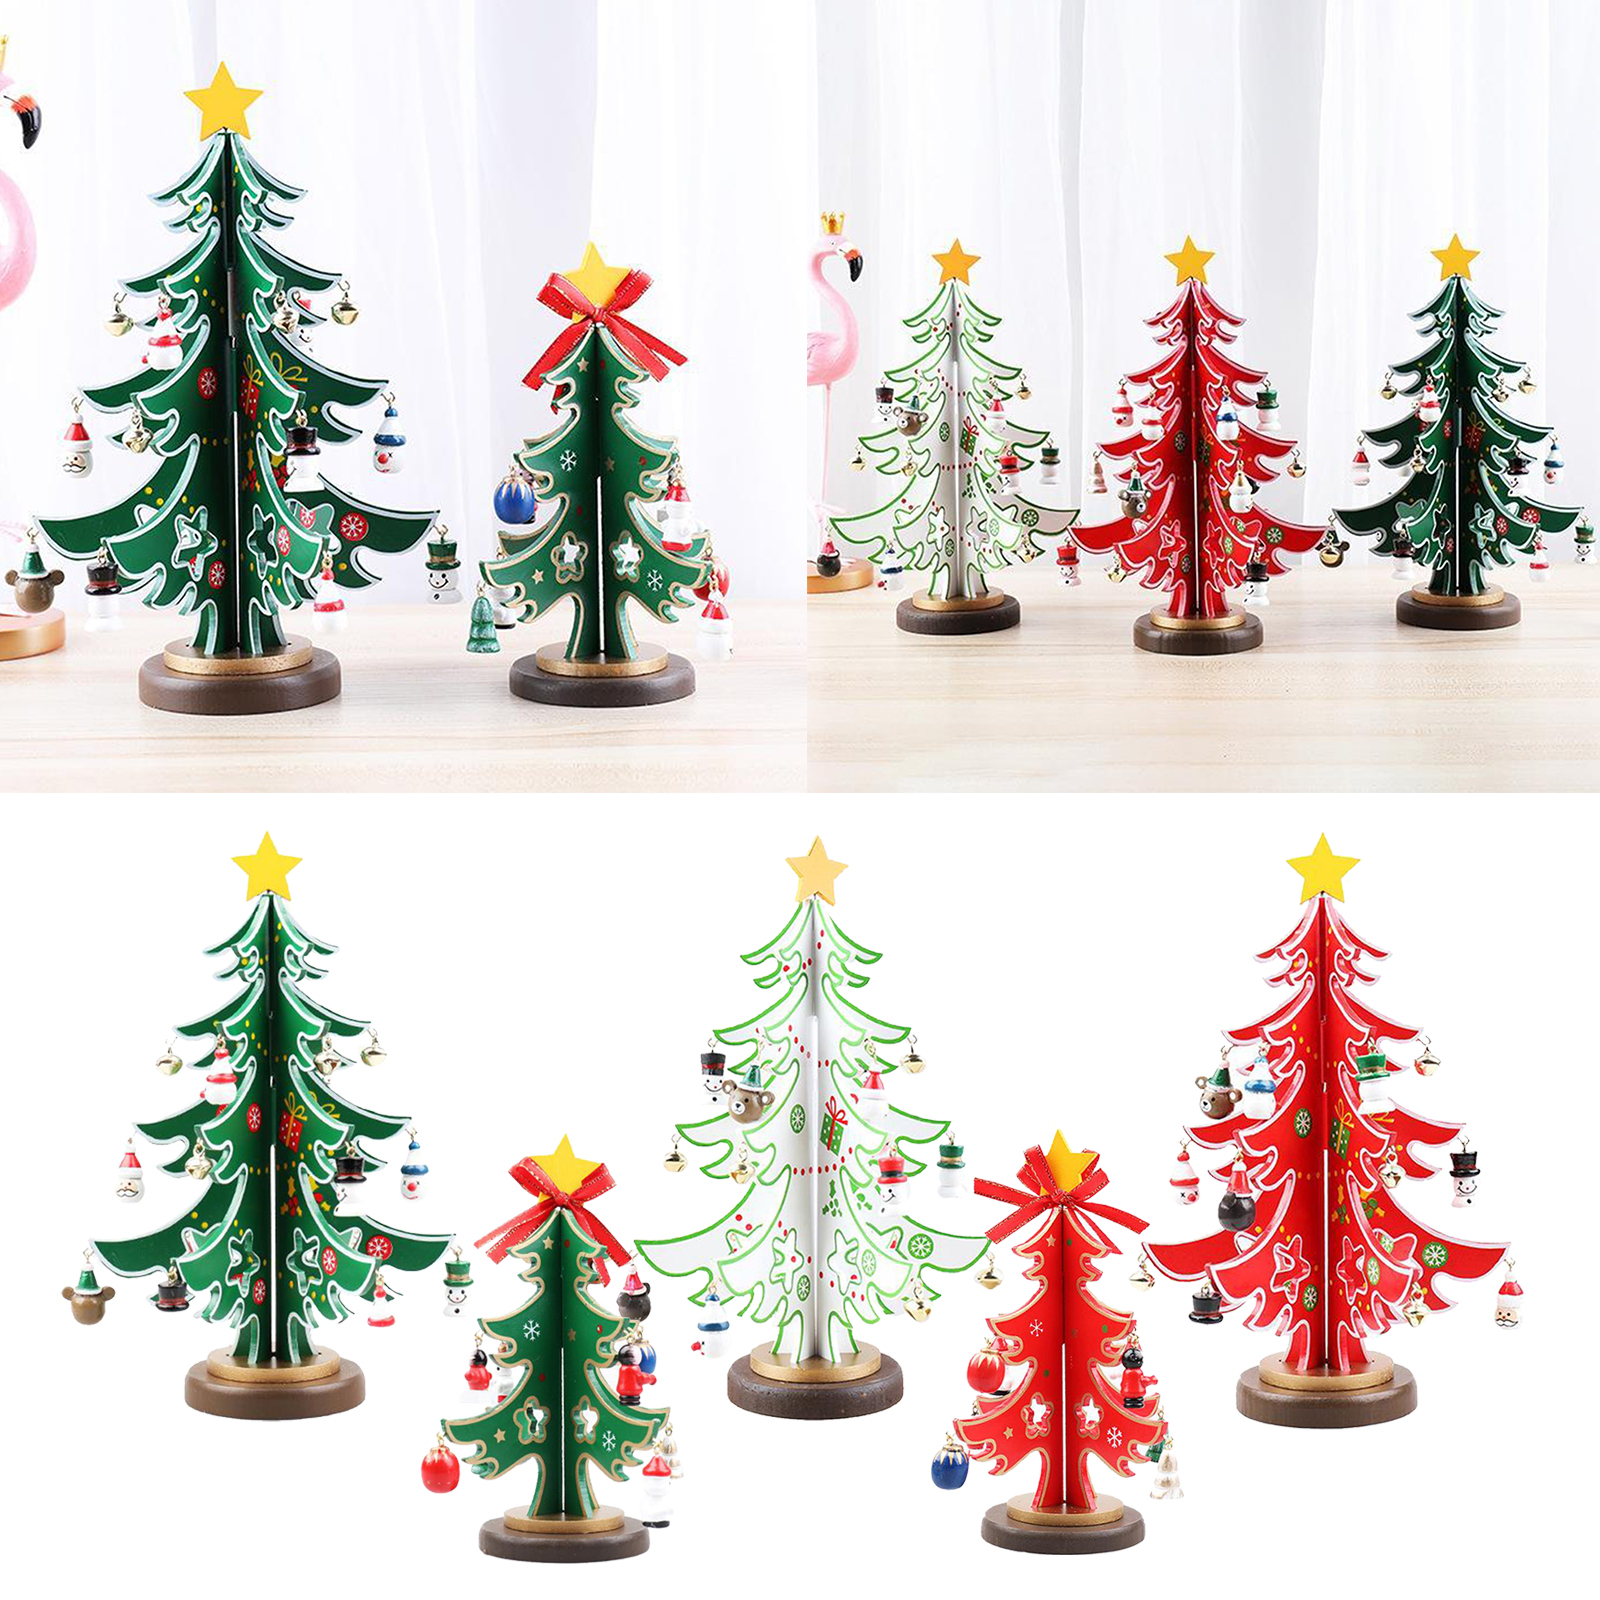 Wooden Christmas Tree Ornament Tabletop 3D Party Bedroom Decor Photo Prop 